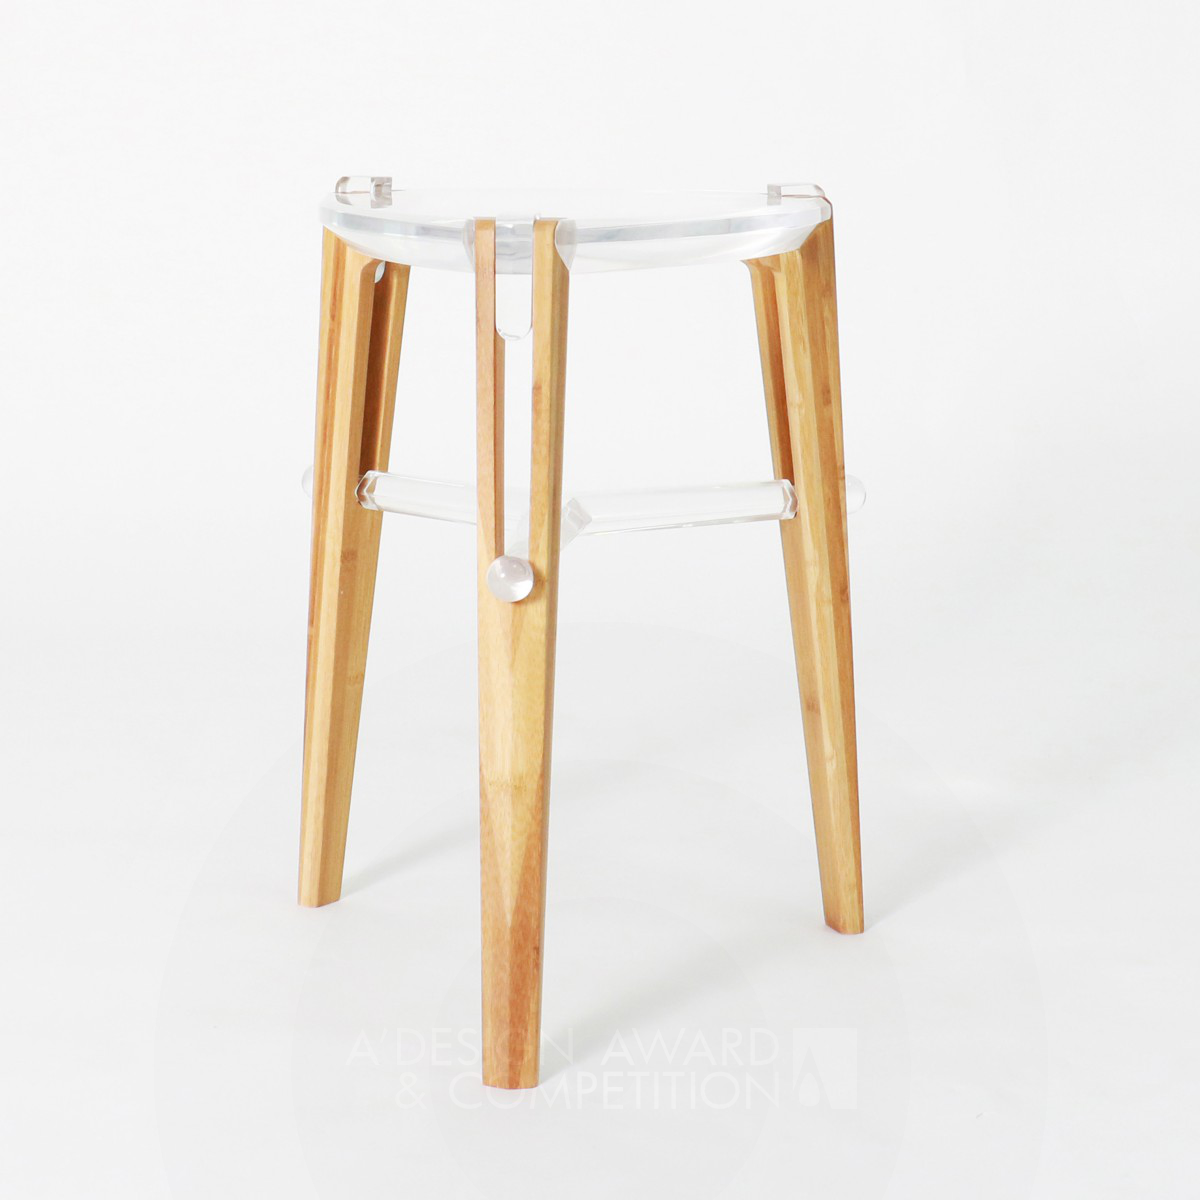 V Stool: Redefining Furniture for the Post-90s Lifestyle